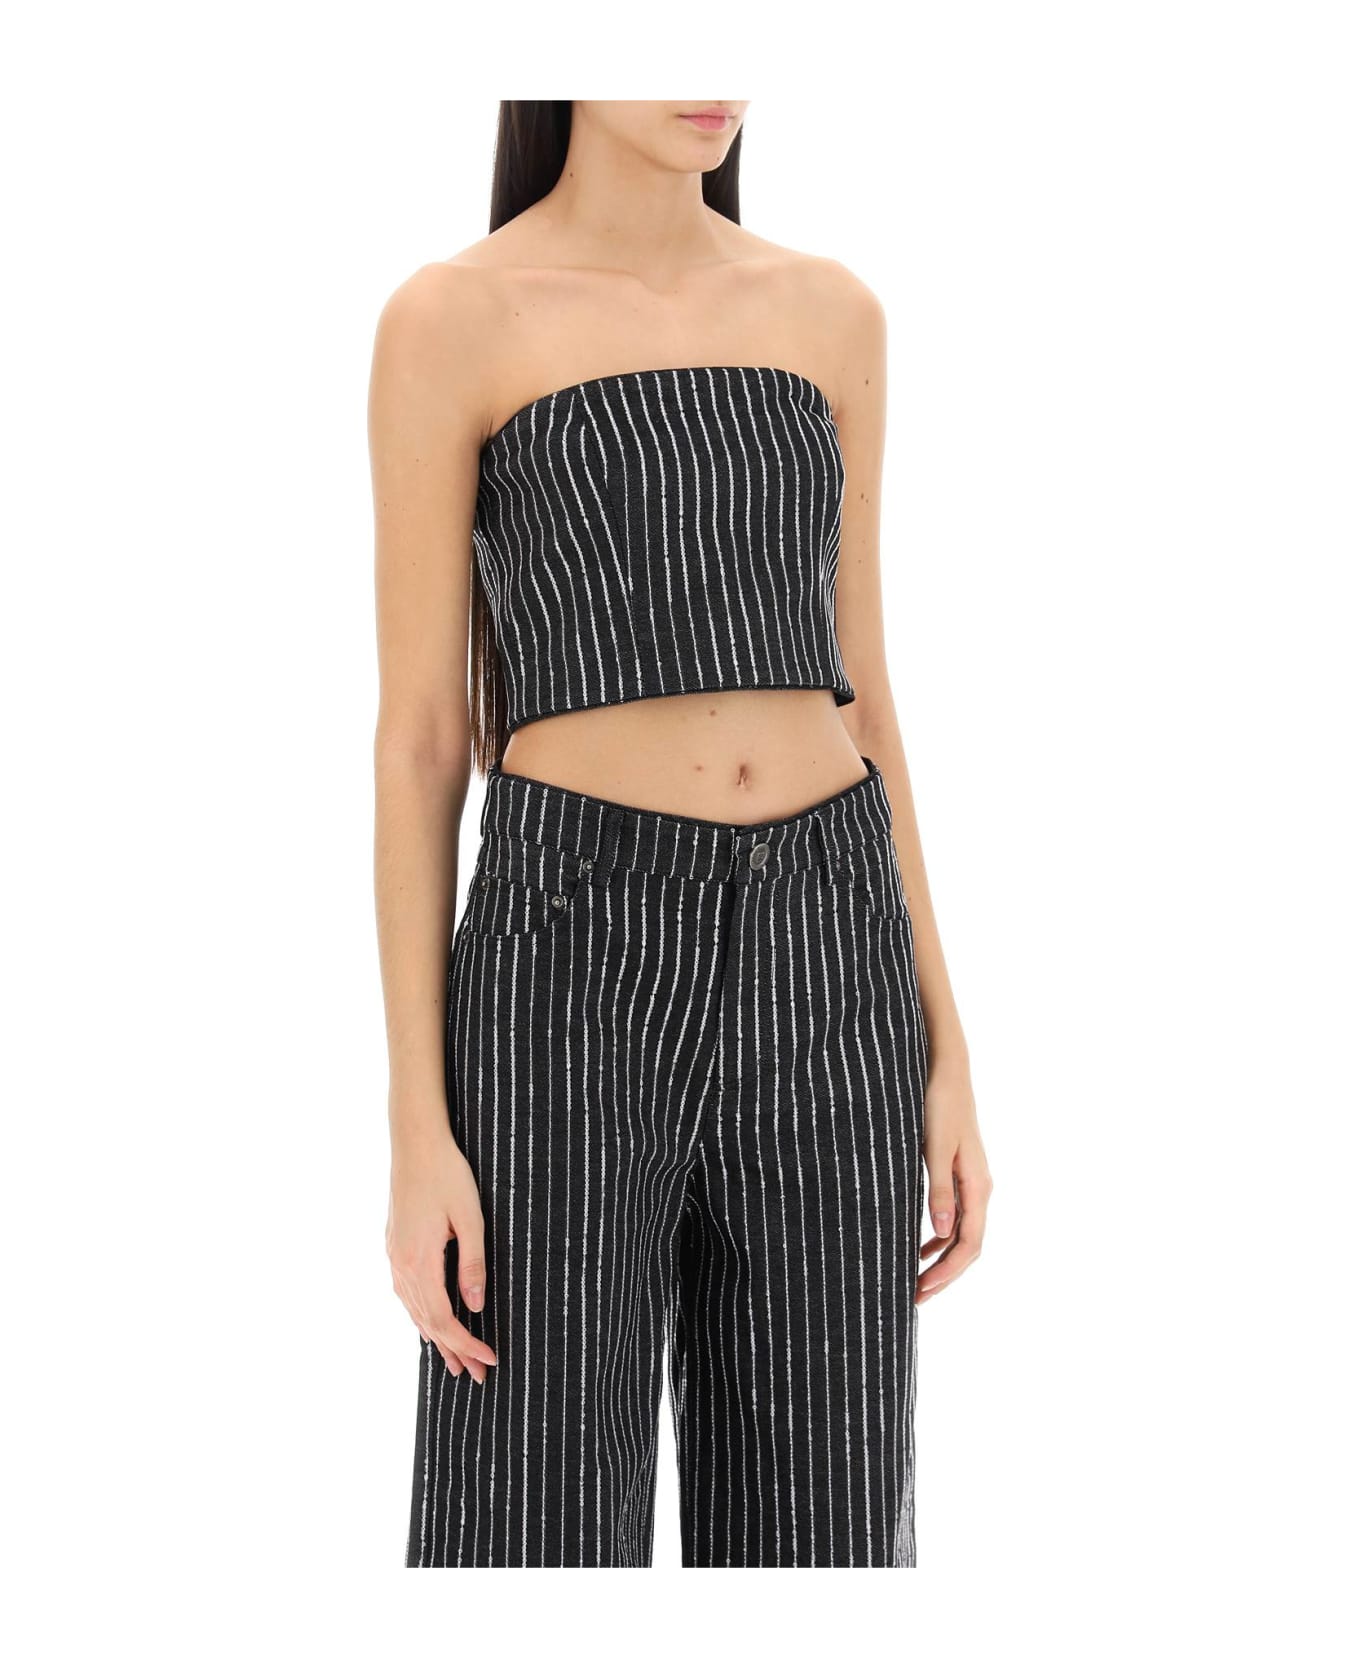 Rotate by Birger Christensen Cropped Top With Sequined Stripes - BLACK (Black) トップス